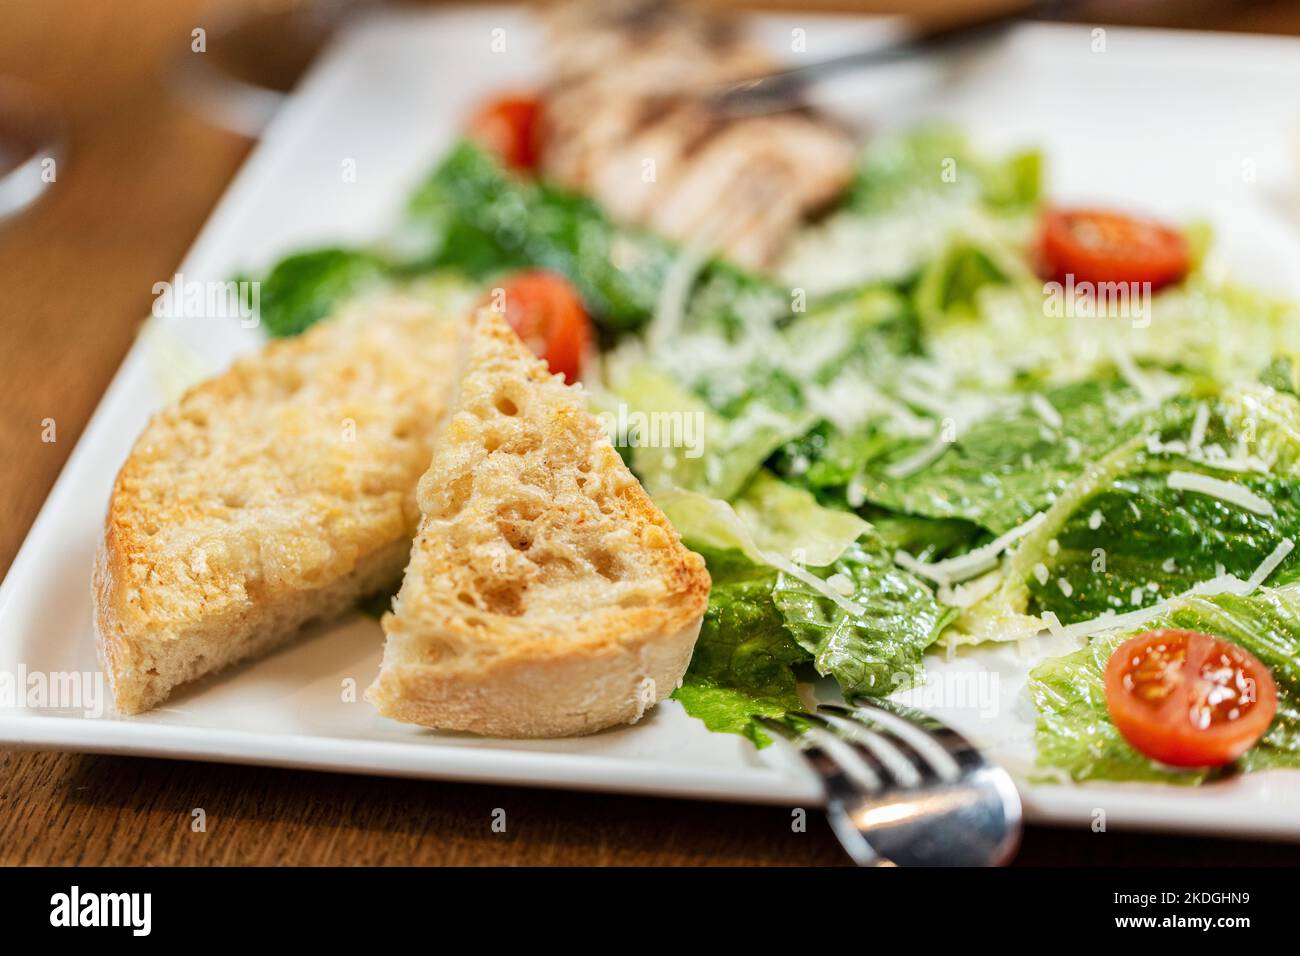 close up of toasted bread and vegetables on plate Stock Photo